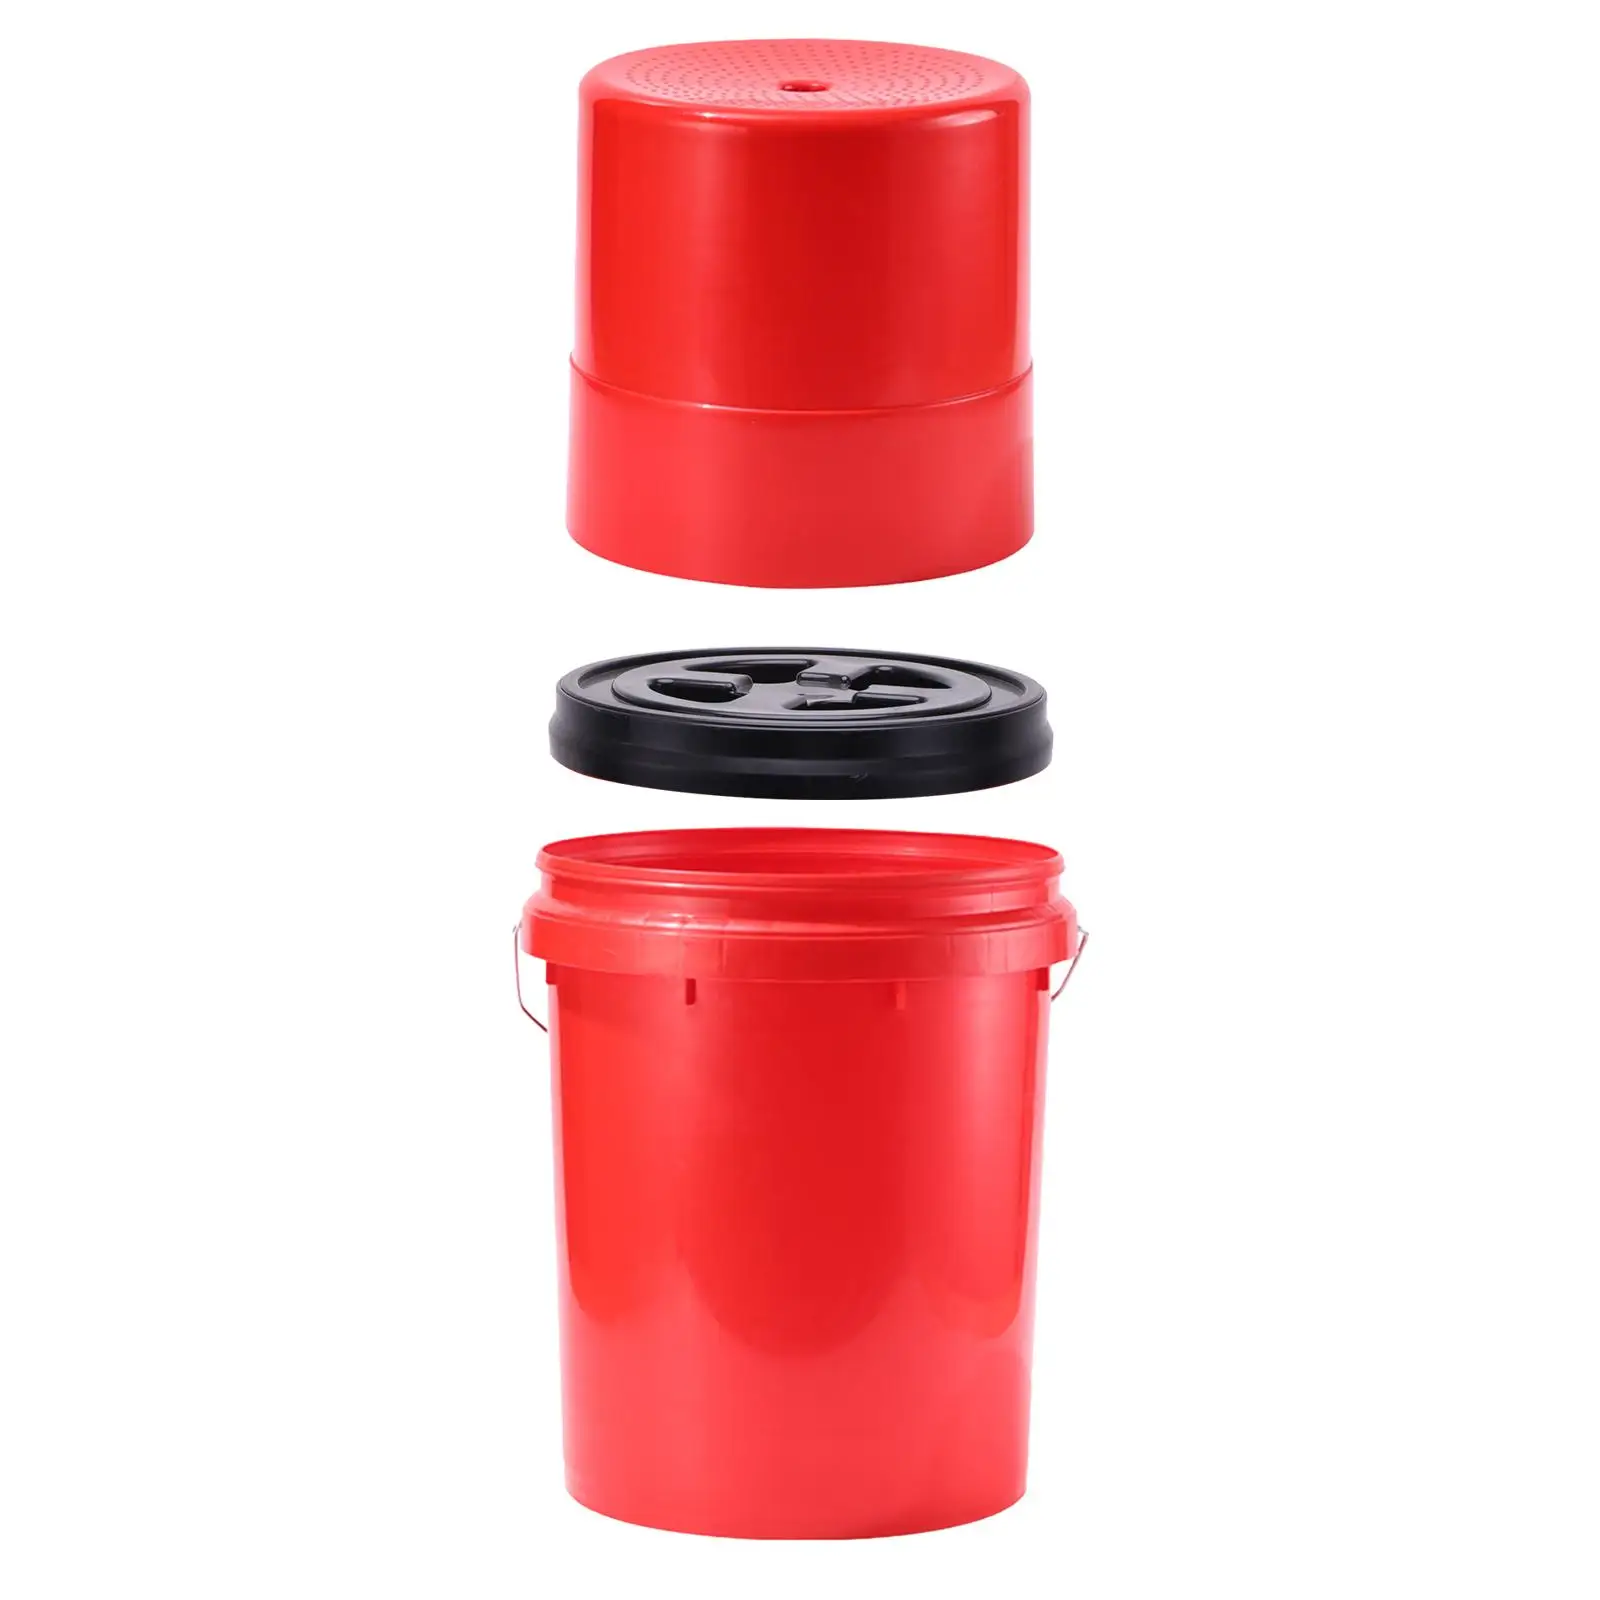 Automotive Washing Accessories Bucket Insert Lid Easy to Push Detachable Convenient Bucket Chair for Car Washing Detailing